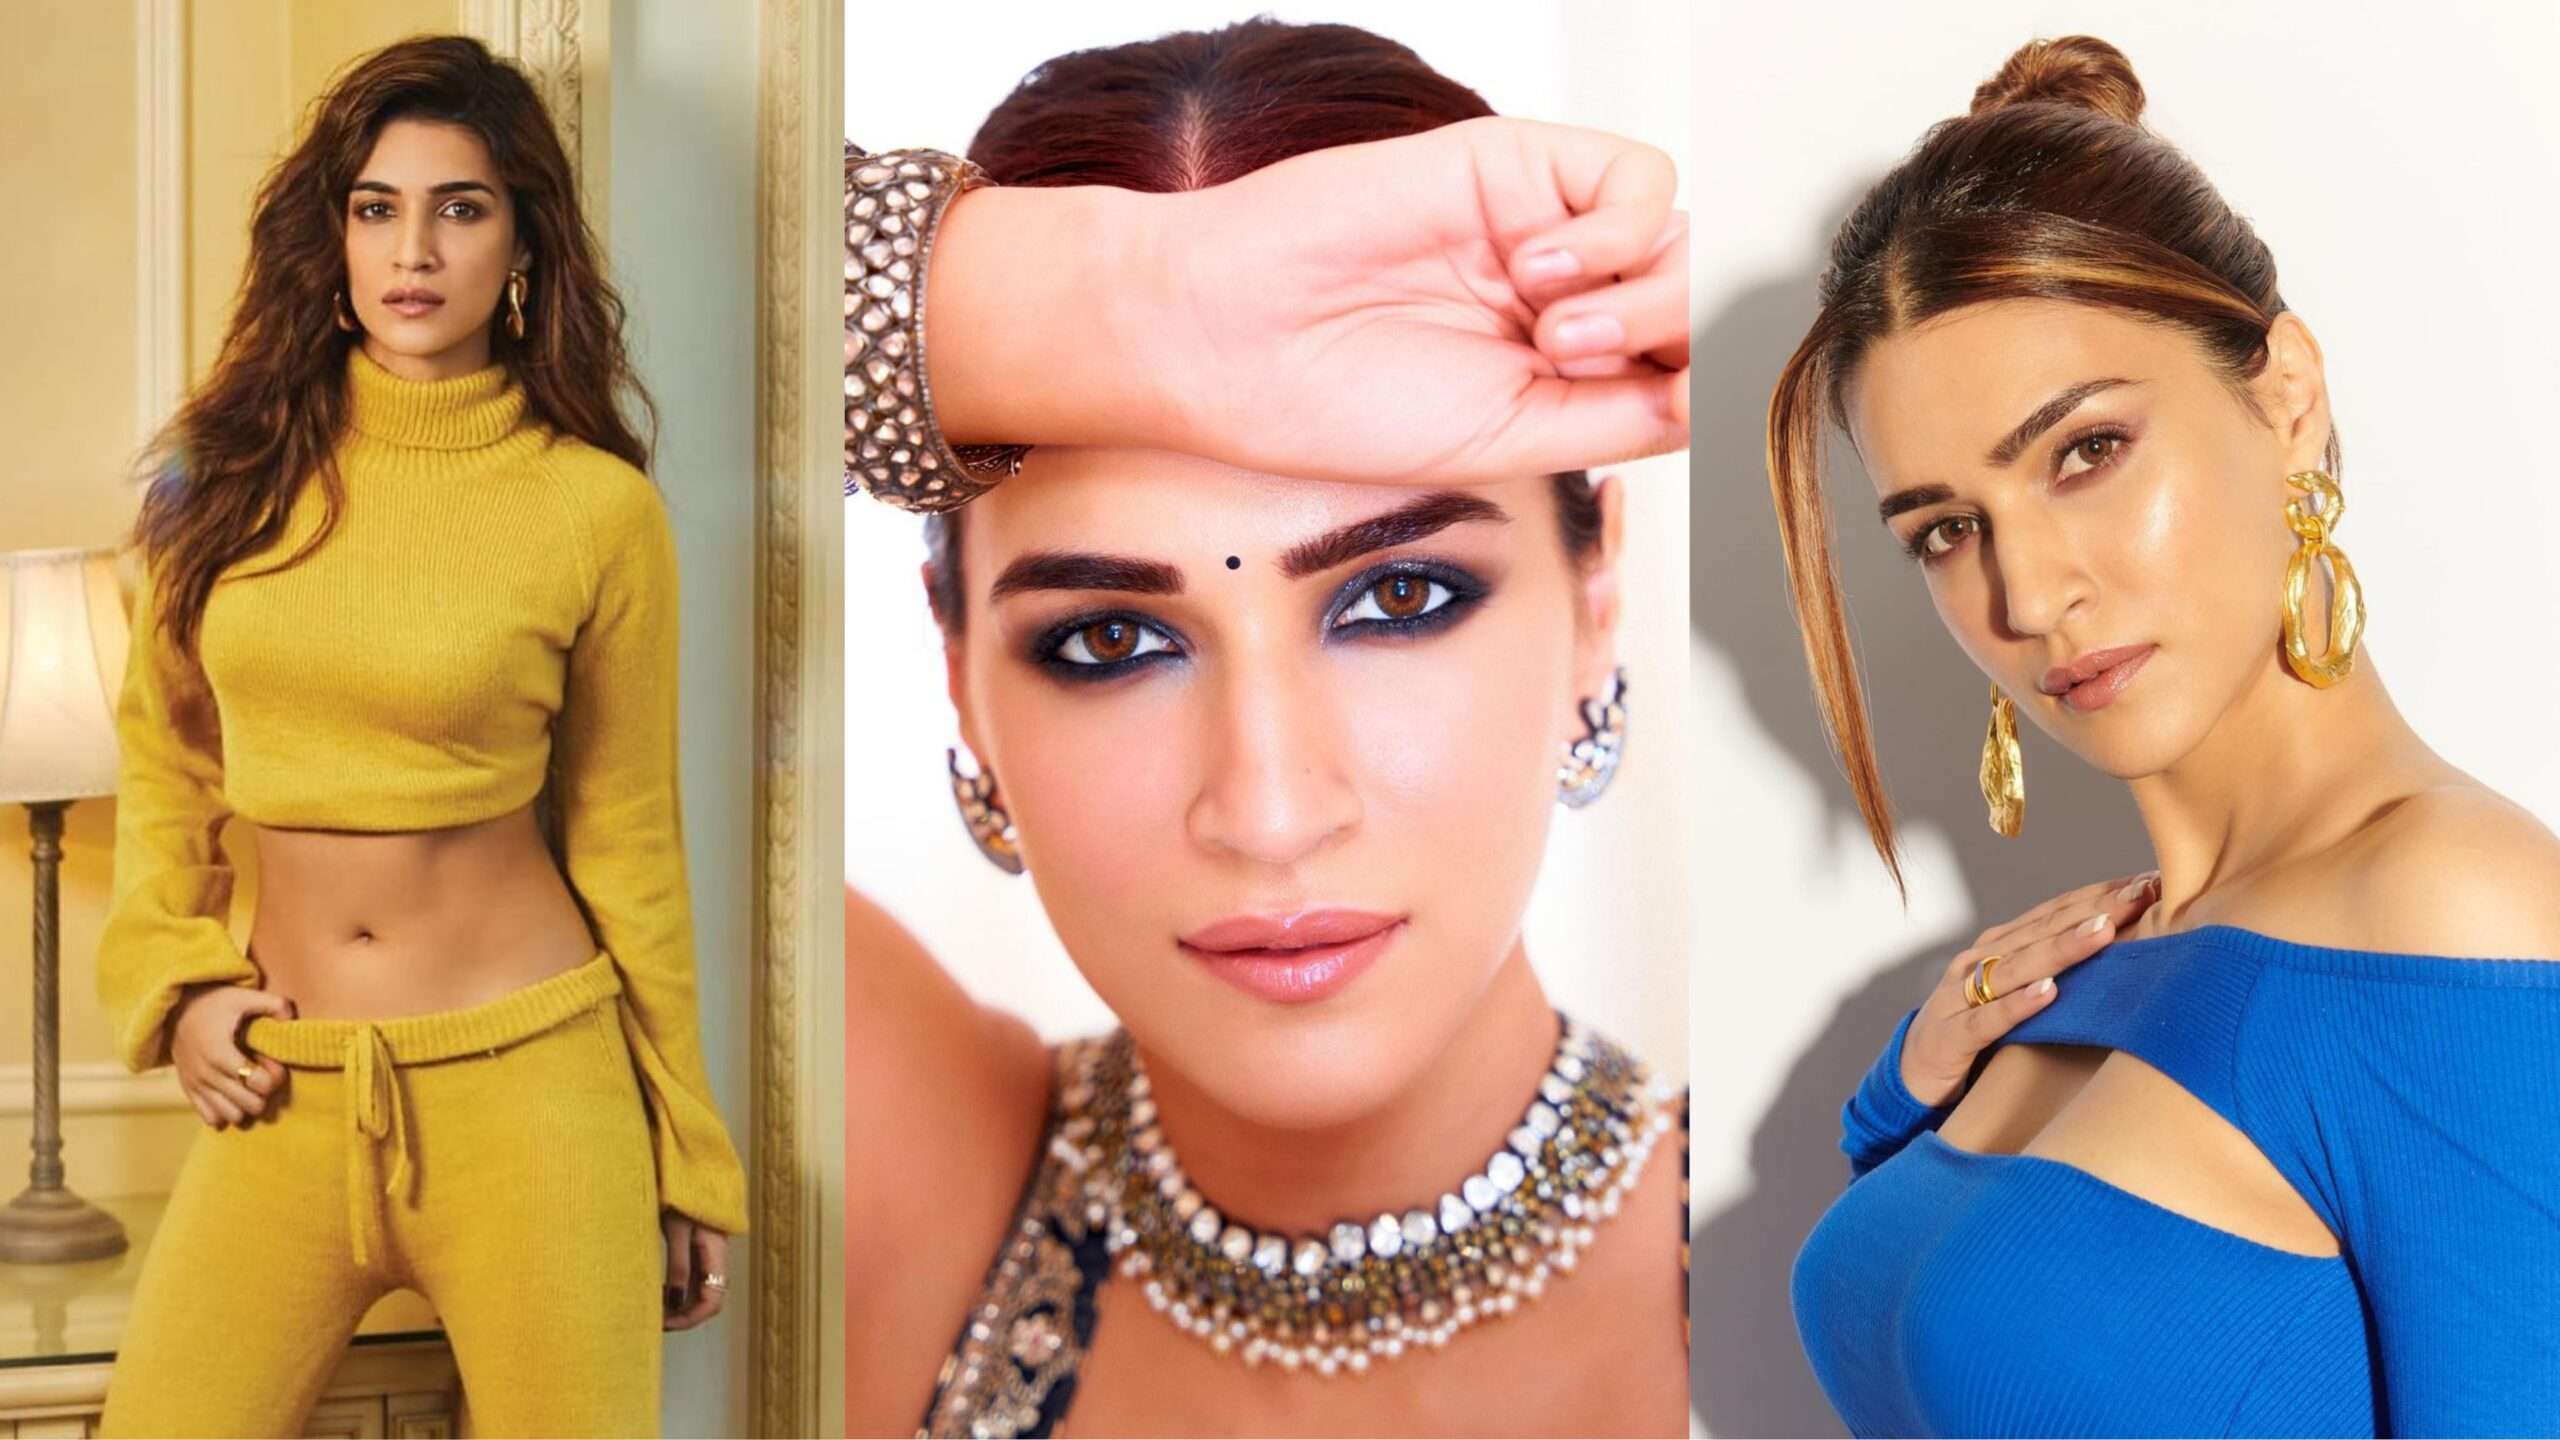 Kriti-Sanon-says-Fashion-Police-is-making-looks-too-serious-for-celebs